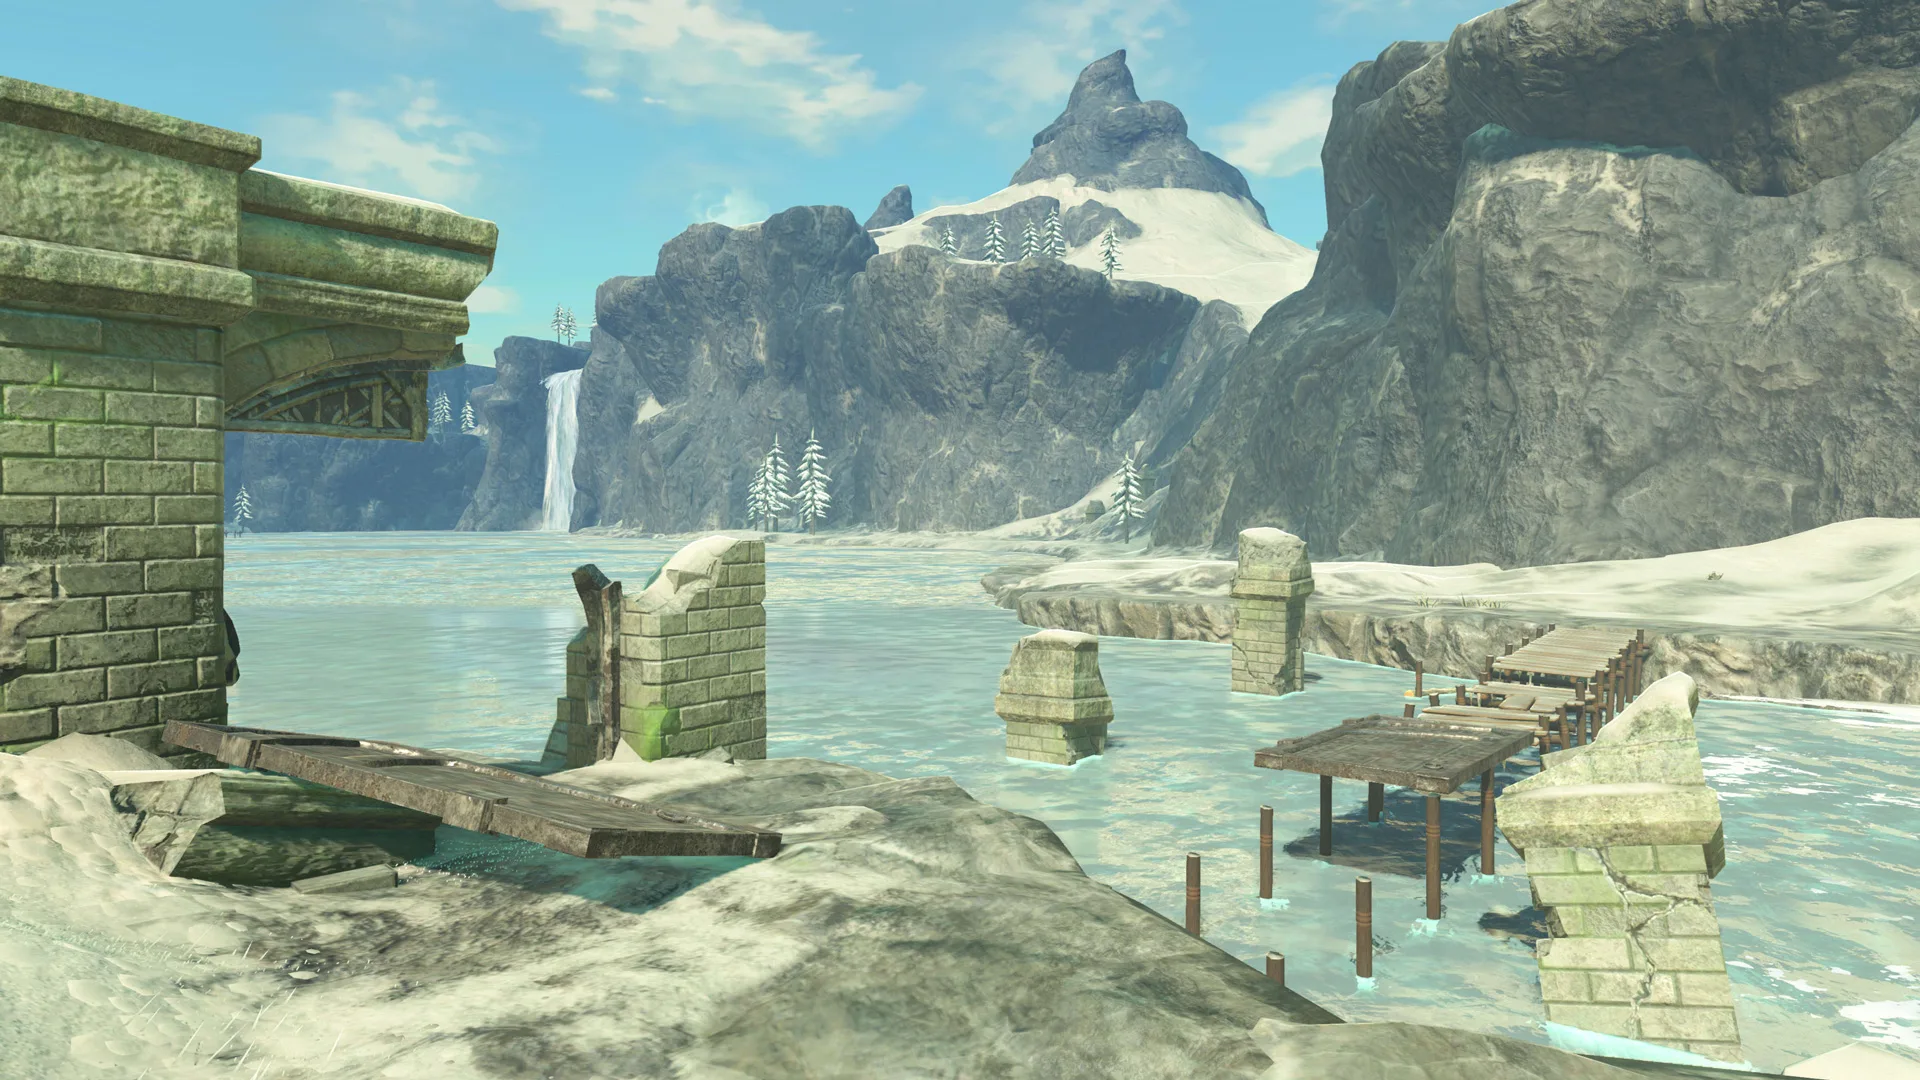 A scene from Zelda Breath of the Wild showing a river scene with rocks and a pier and ruins sticking out of the water. In the distance are snowcapped mountains and blue sky.